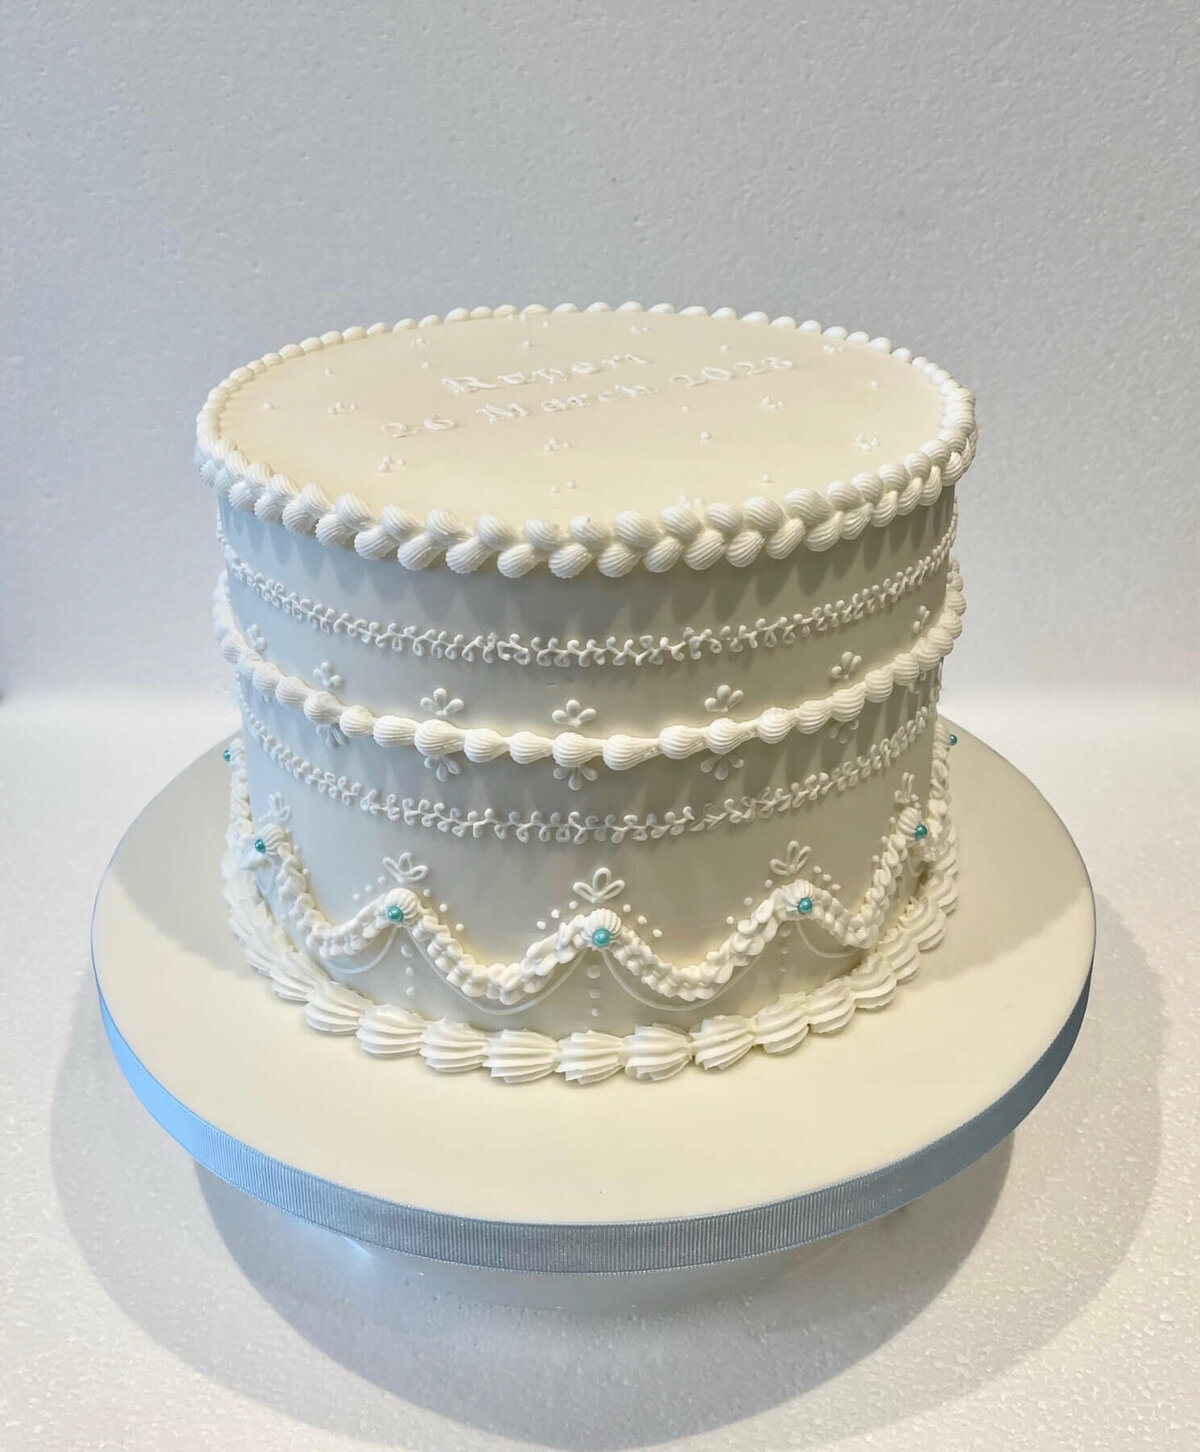 A completely white cake with piped icing designA completely white cake with piped icing design